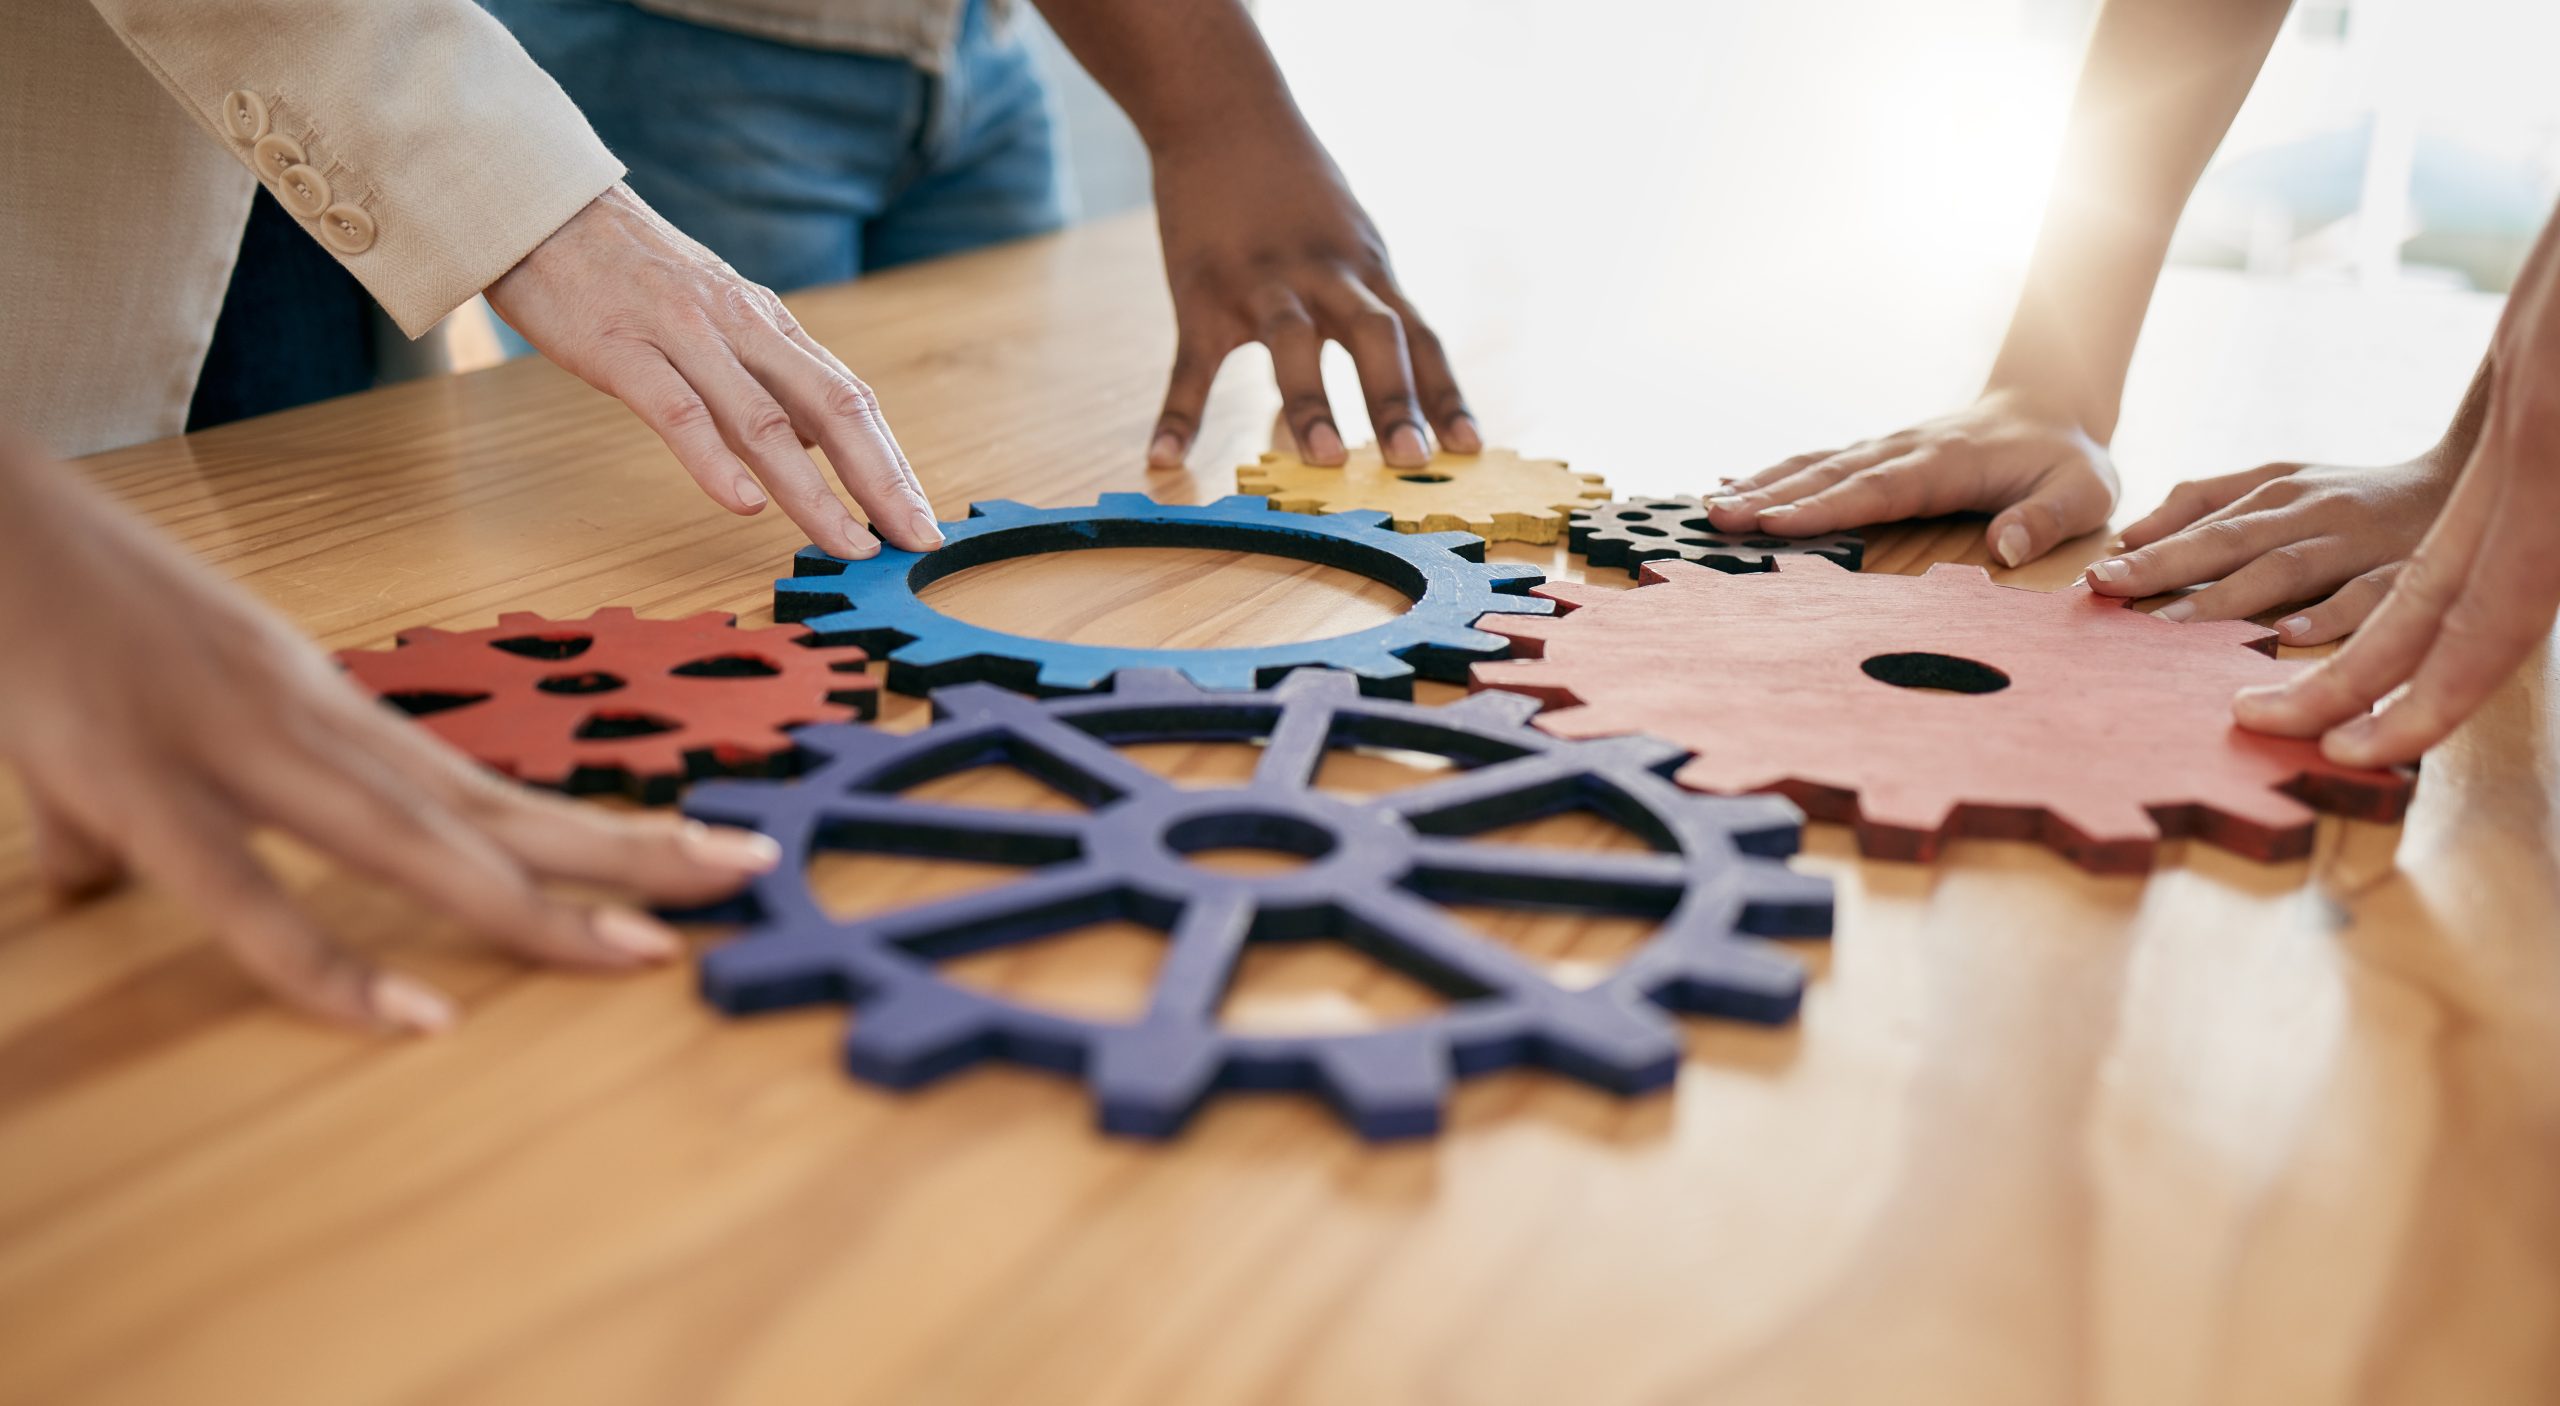 A table with symbolic wooden gears on it, with multiple peope's hands touching the gears.